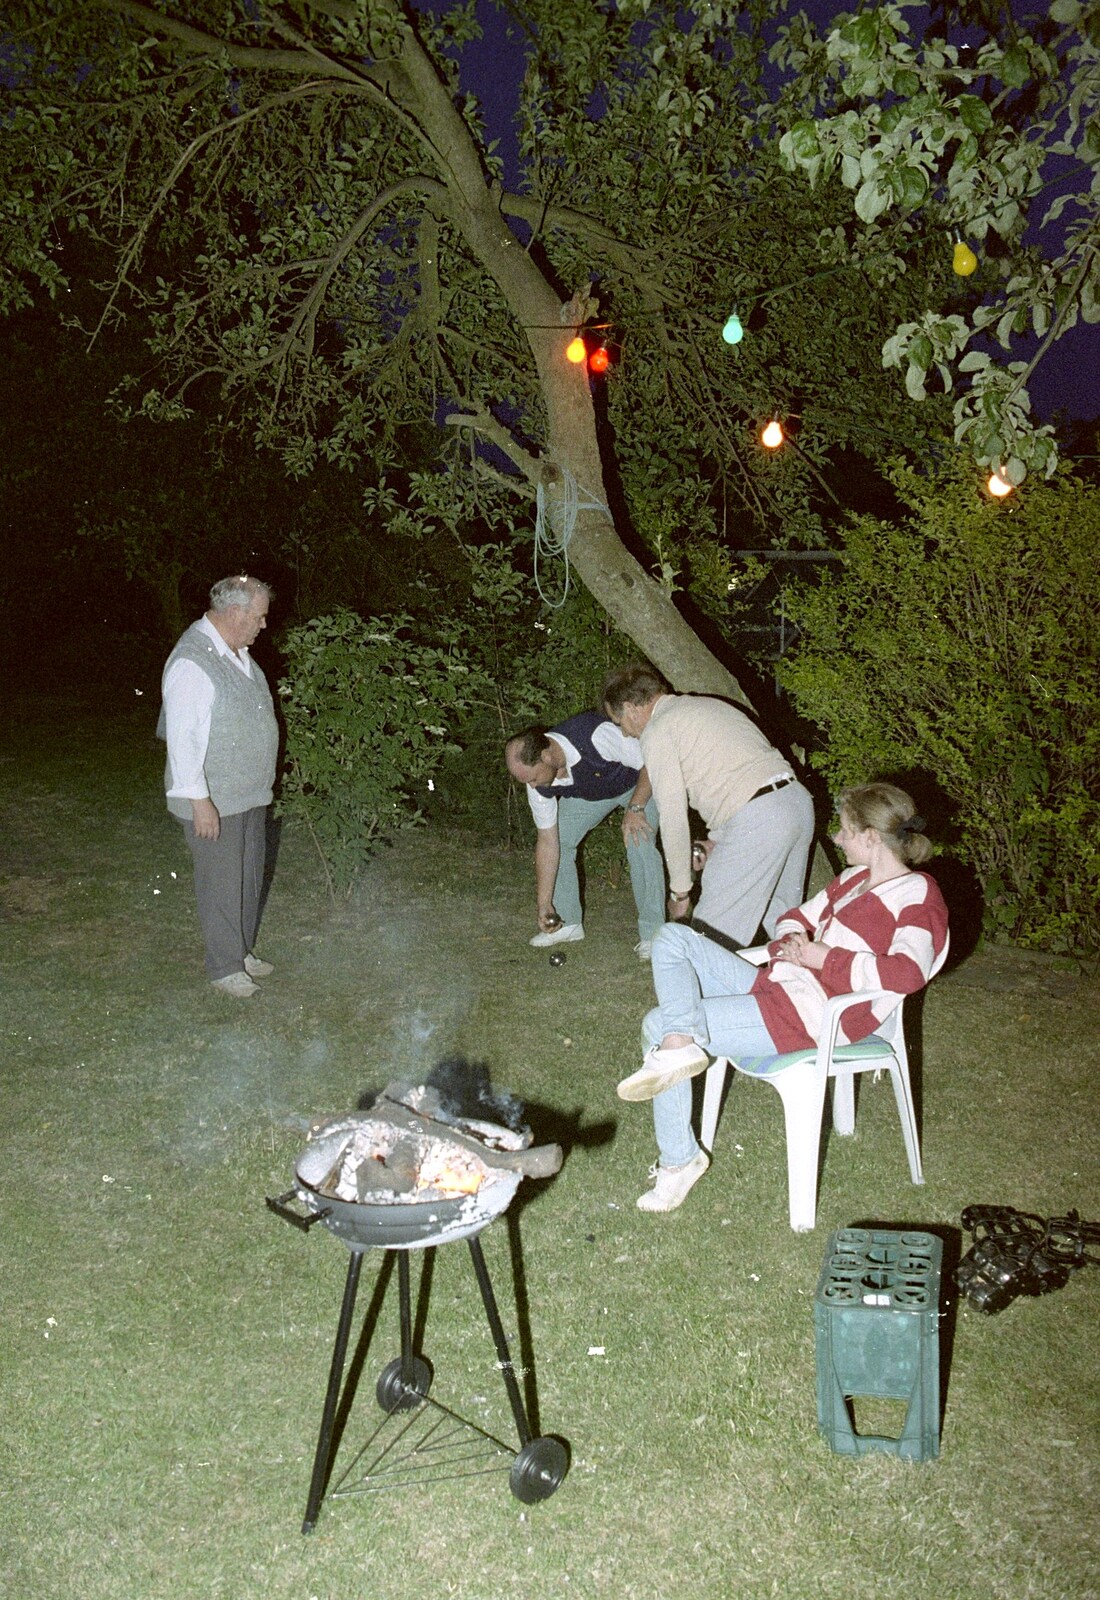 The game of boules contines from Sarah's Birthday Barbeque, Burston, Norfolk - 7th June 1994